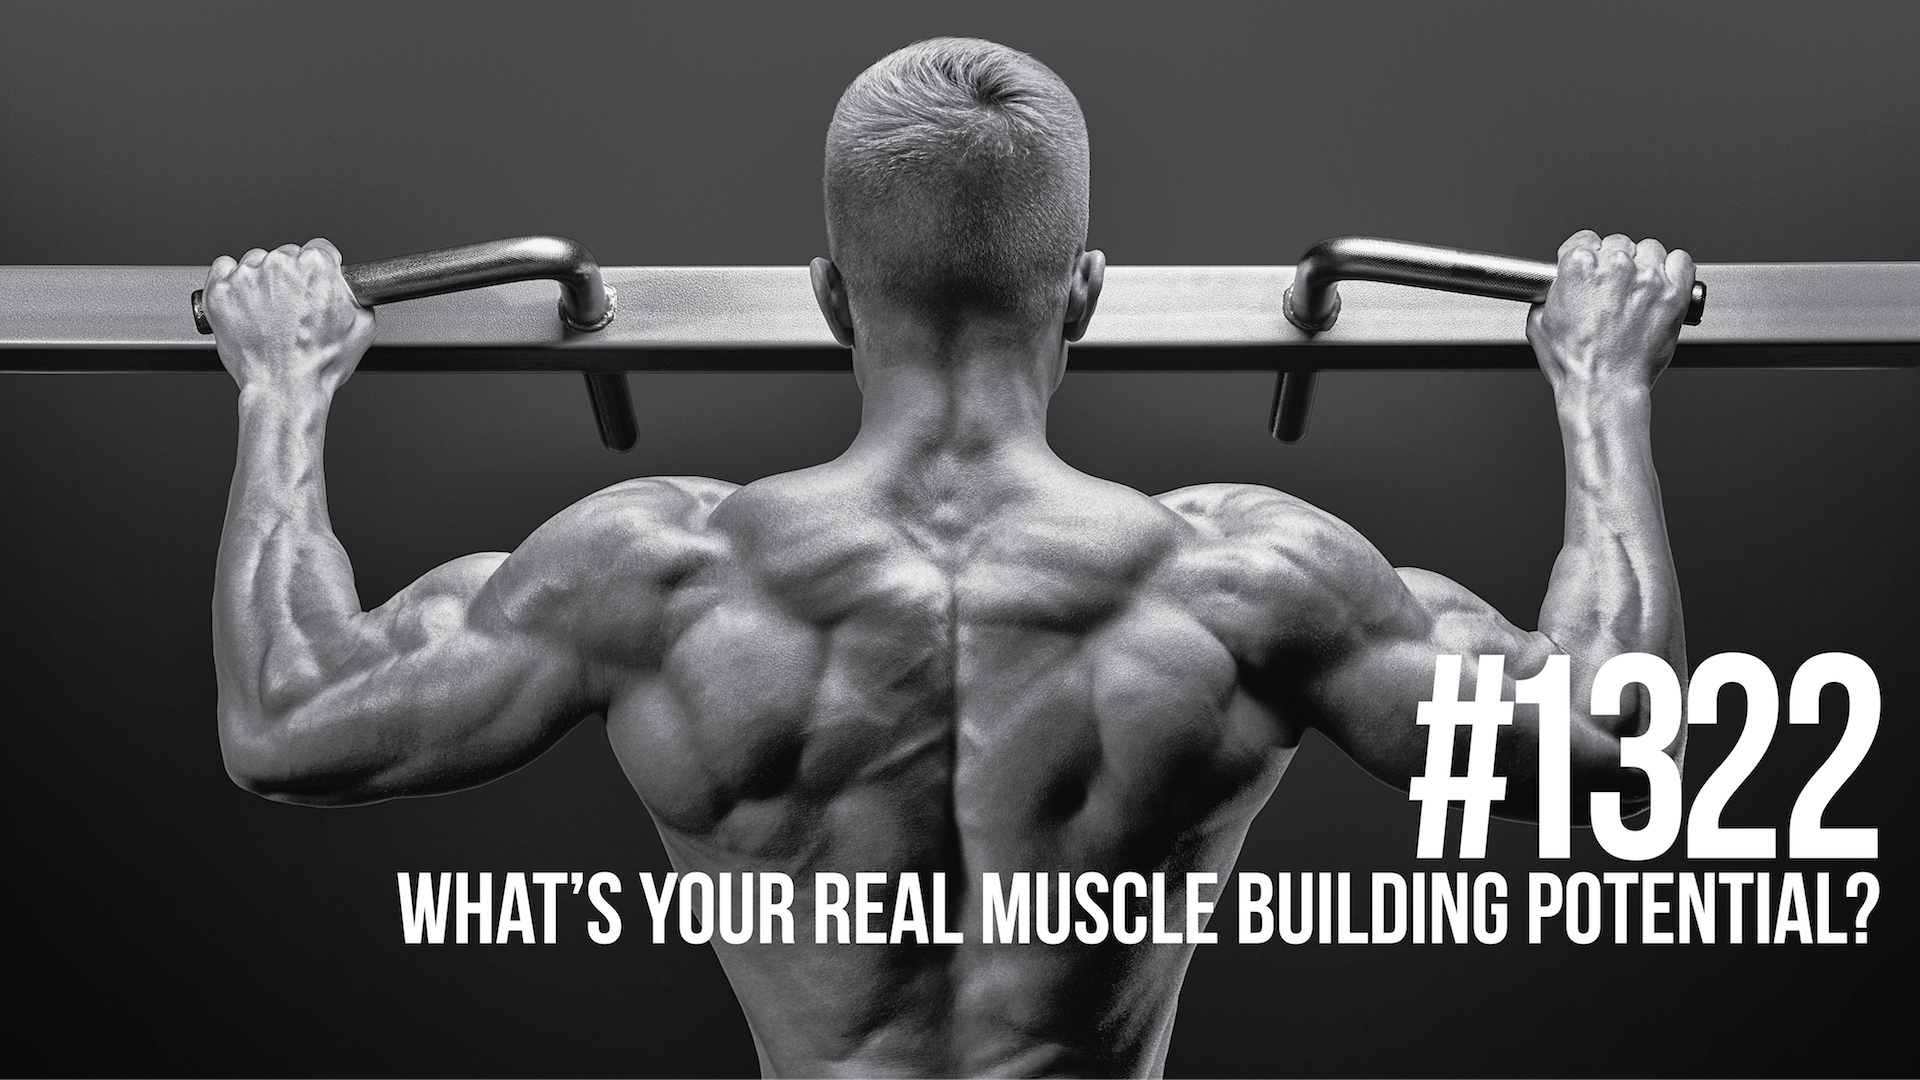 1322: What’s Your Real Muscle Building Potential? (And how to get there…)